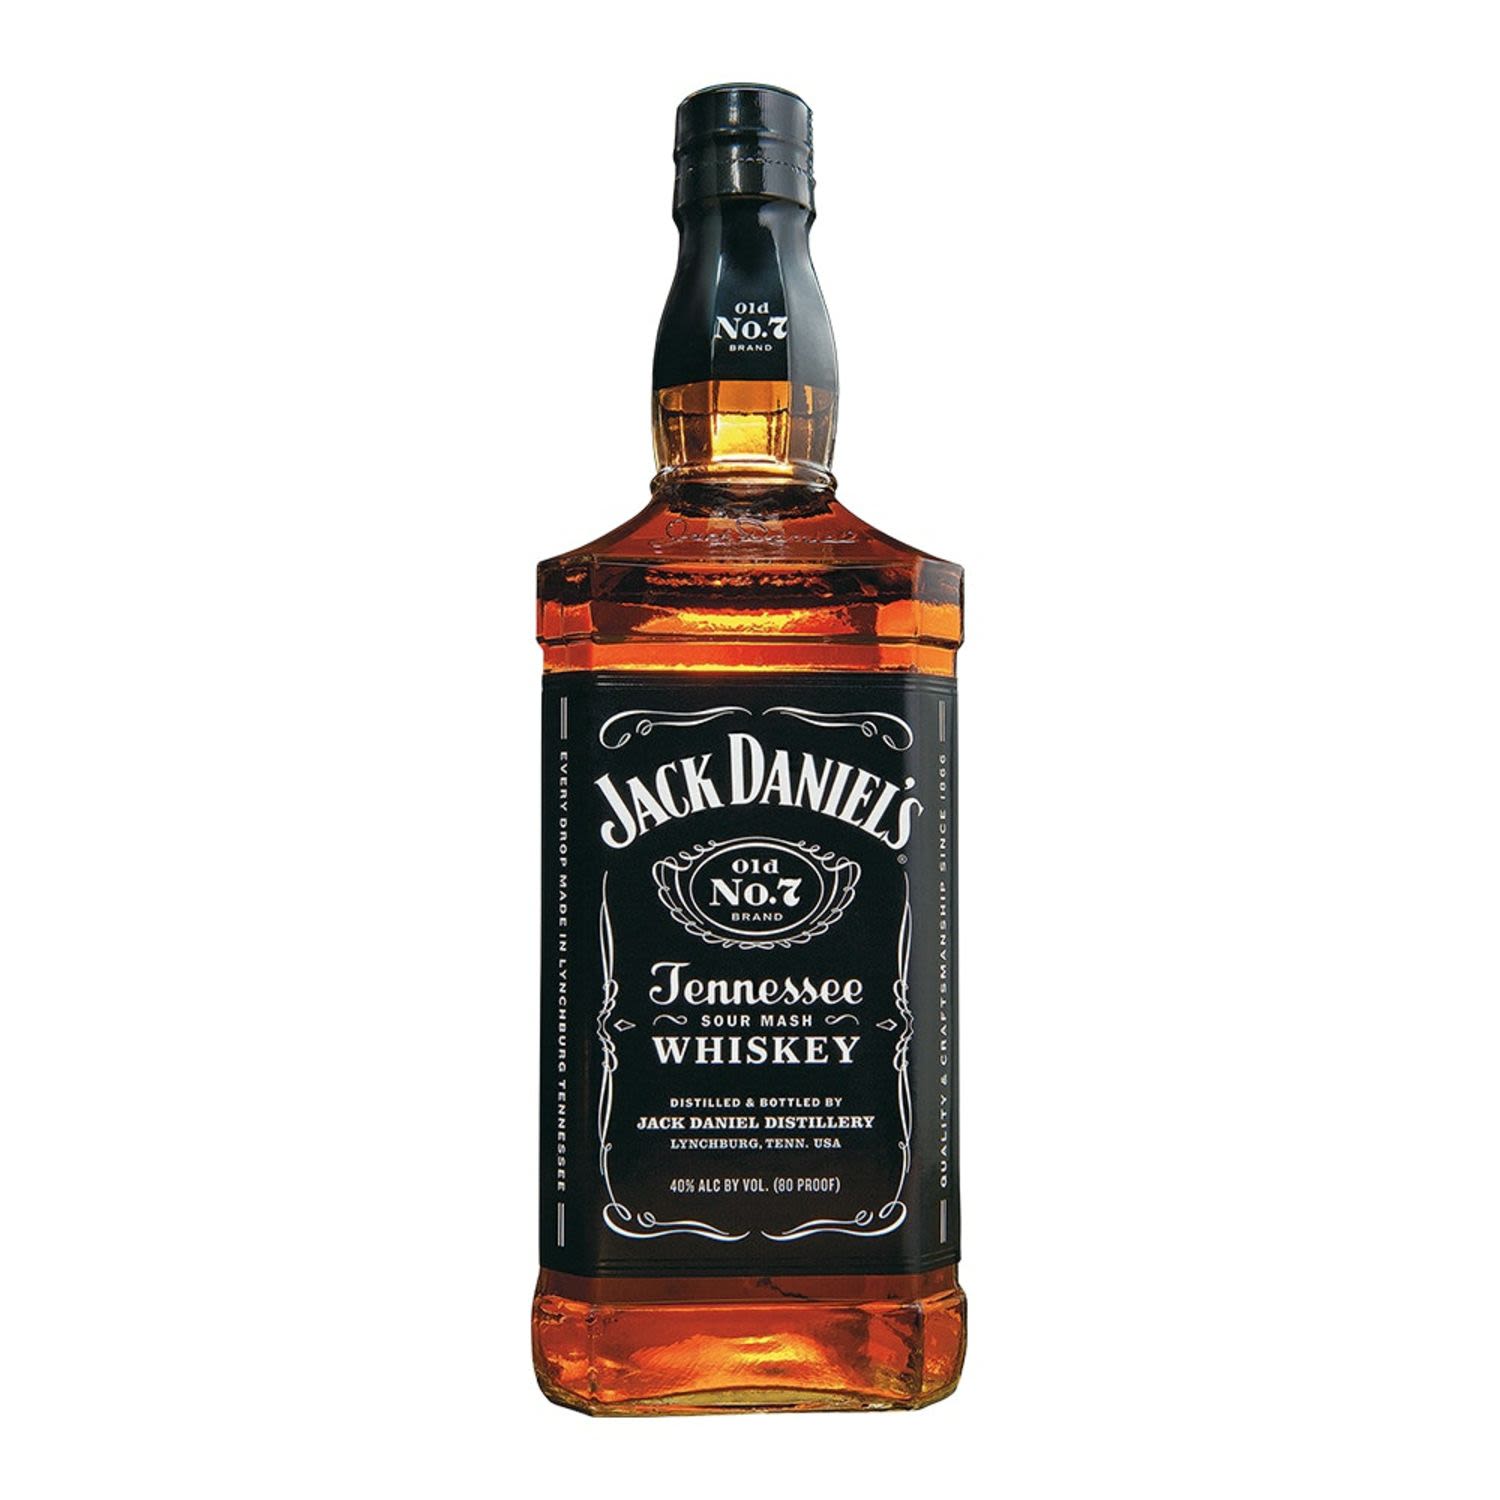 Jack Daniel's Old No. 7 Tennessee Whiskey 1L Bottle